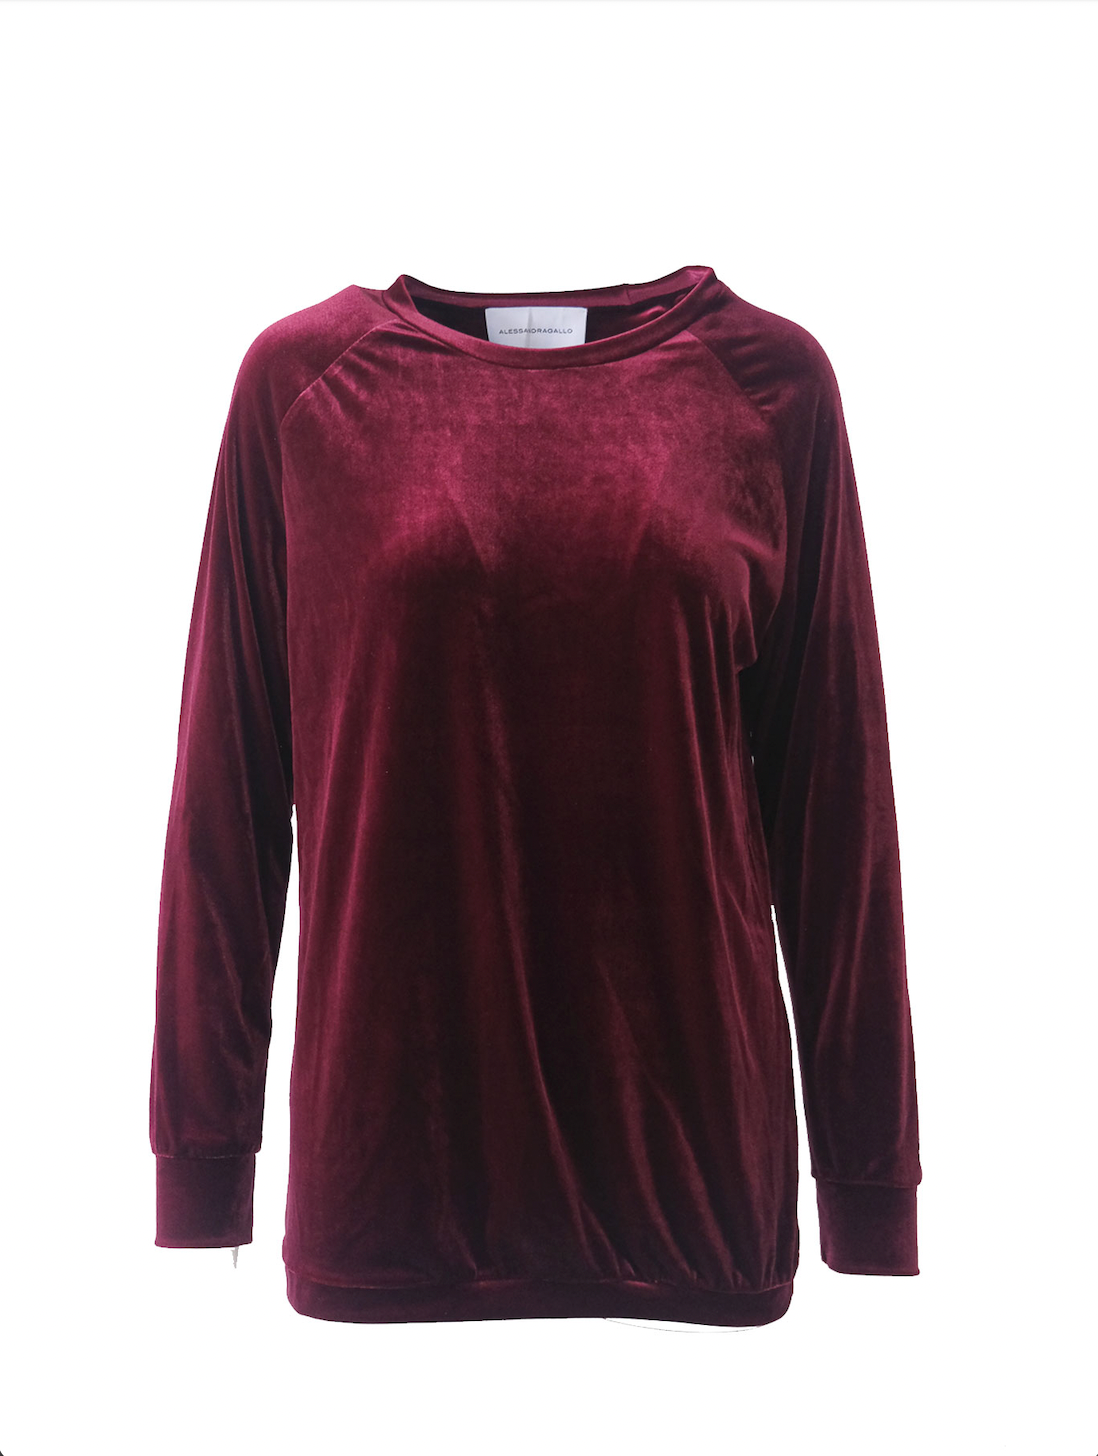 FLORA - round-necked blouse in bordeaux chenille